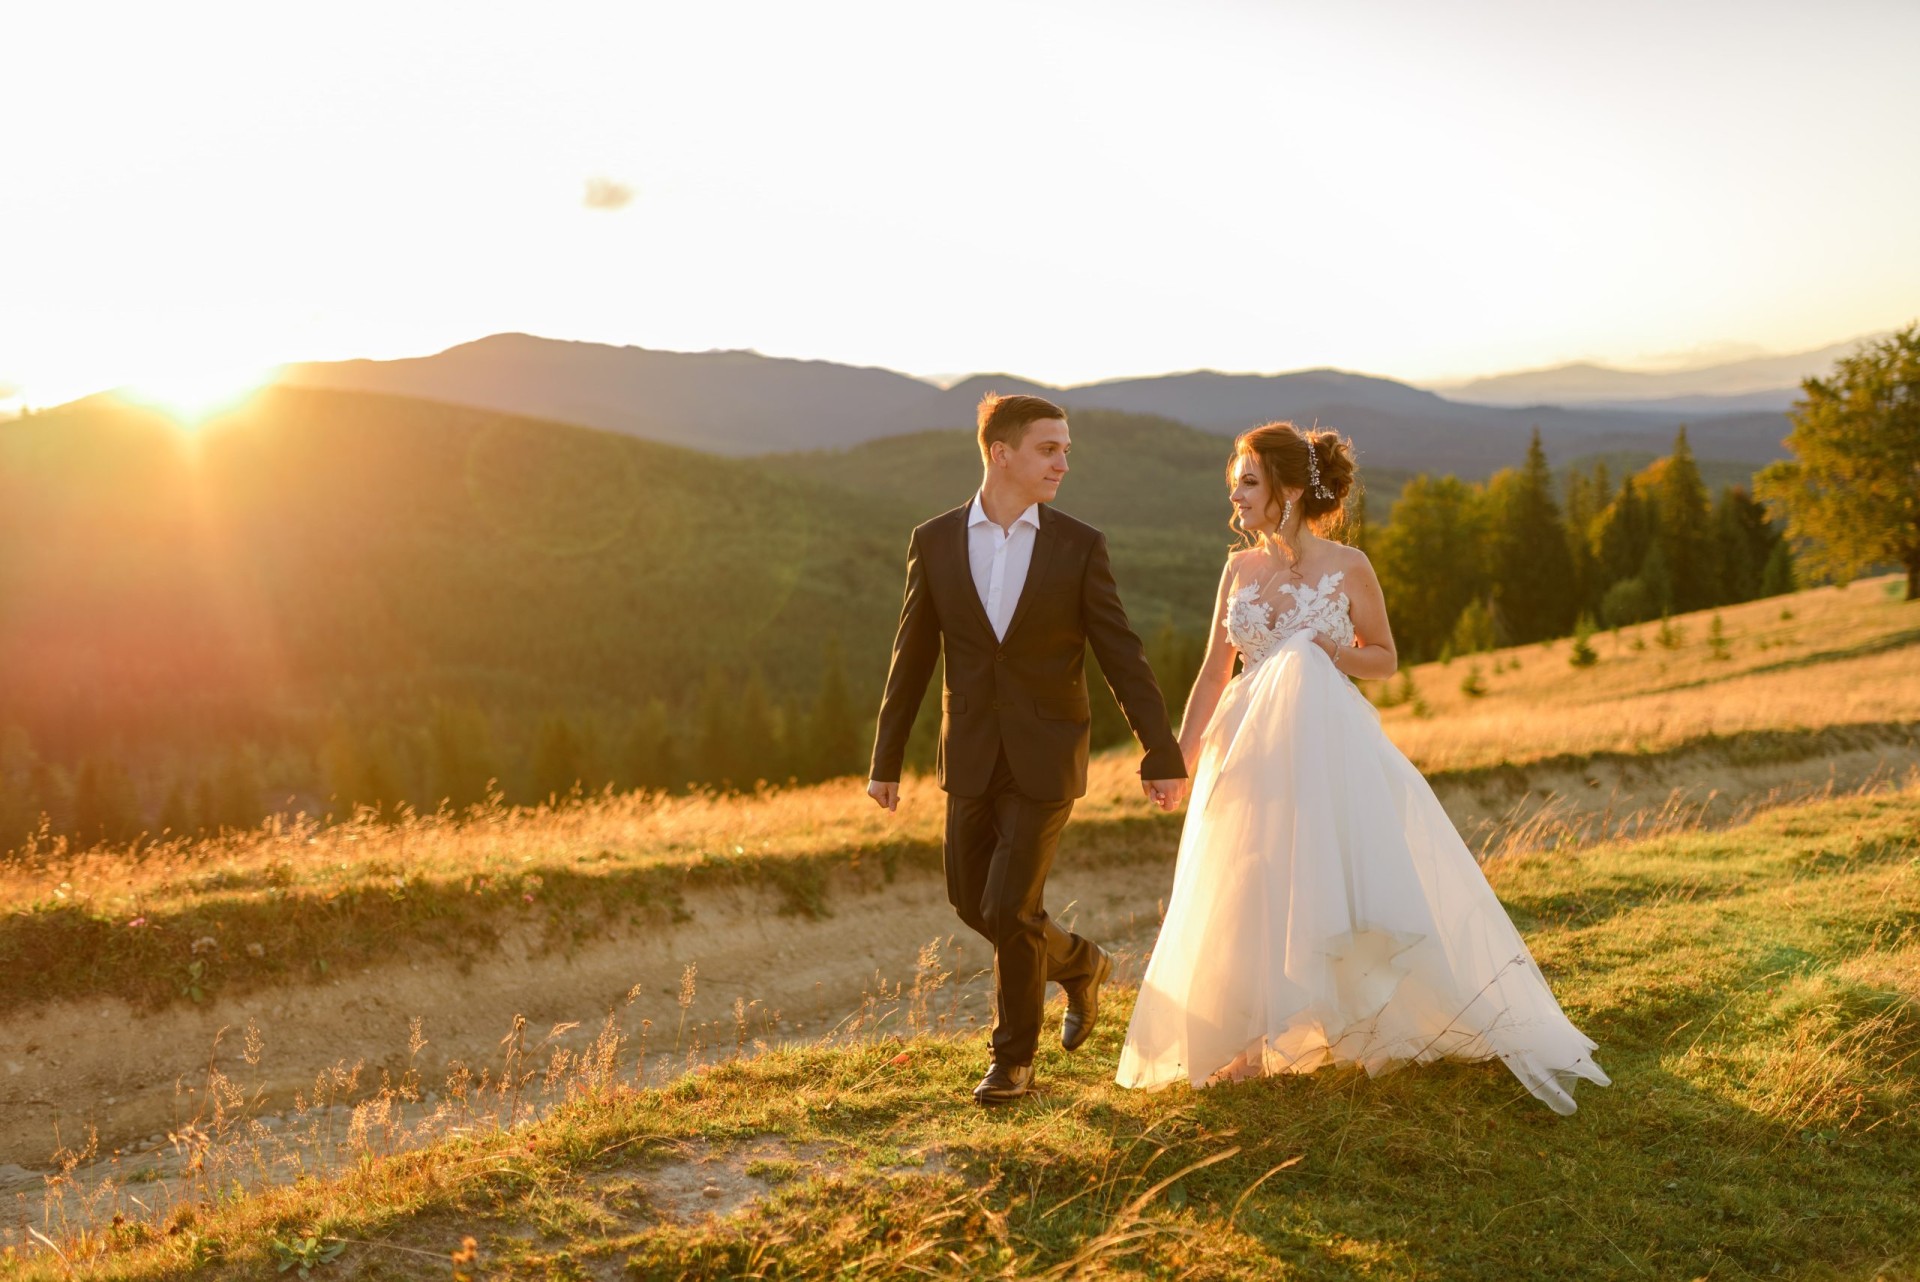 wedding photography in the mountains the bride an 2021 09 01 17 51 58 utc min scaled